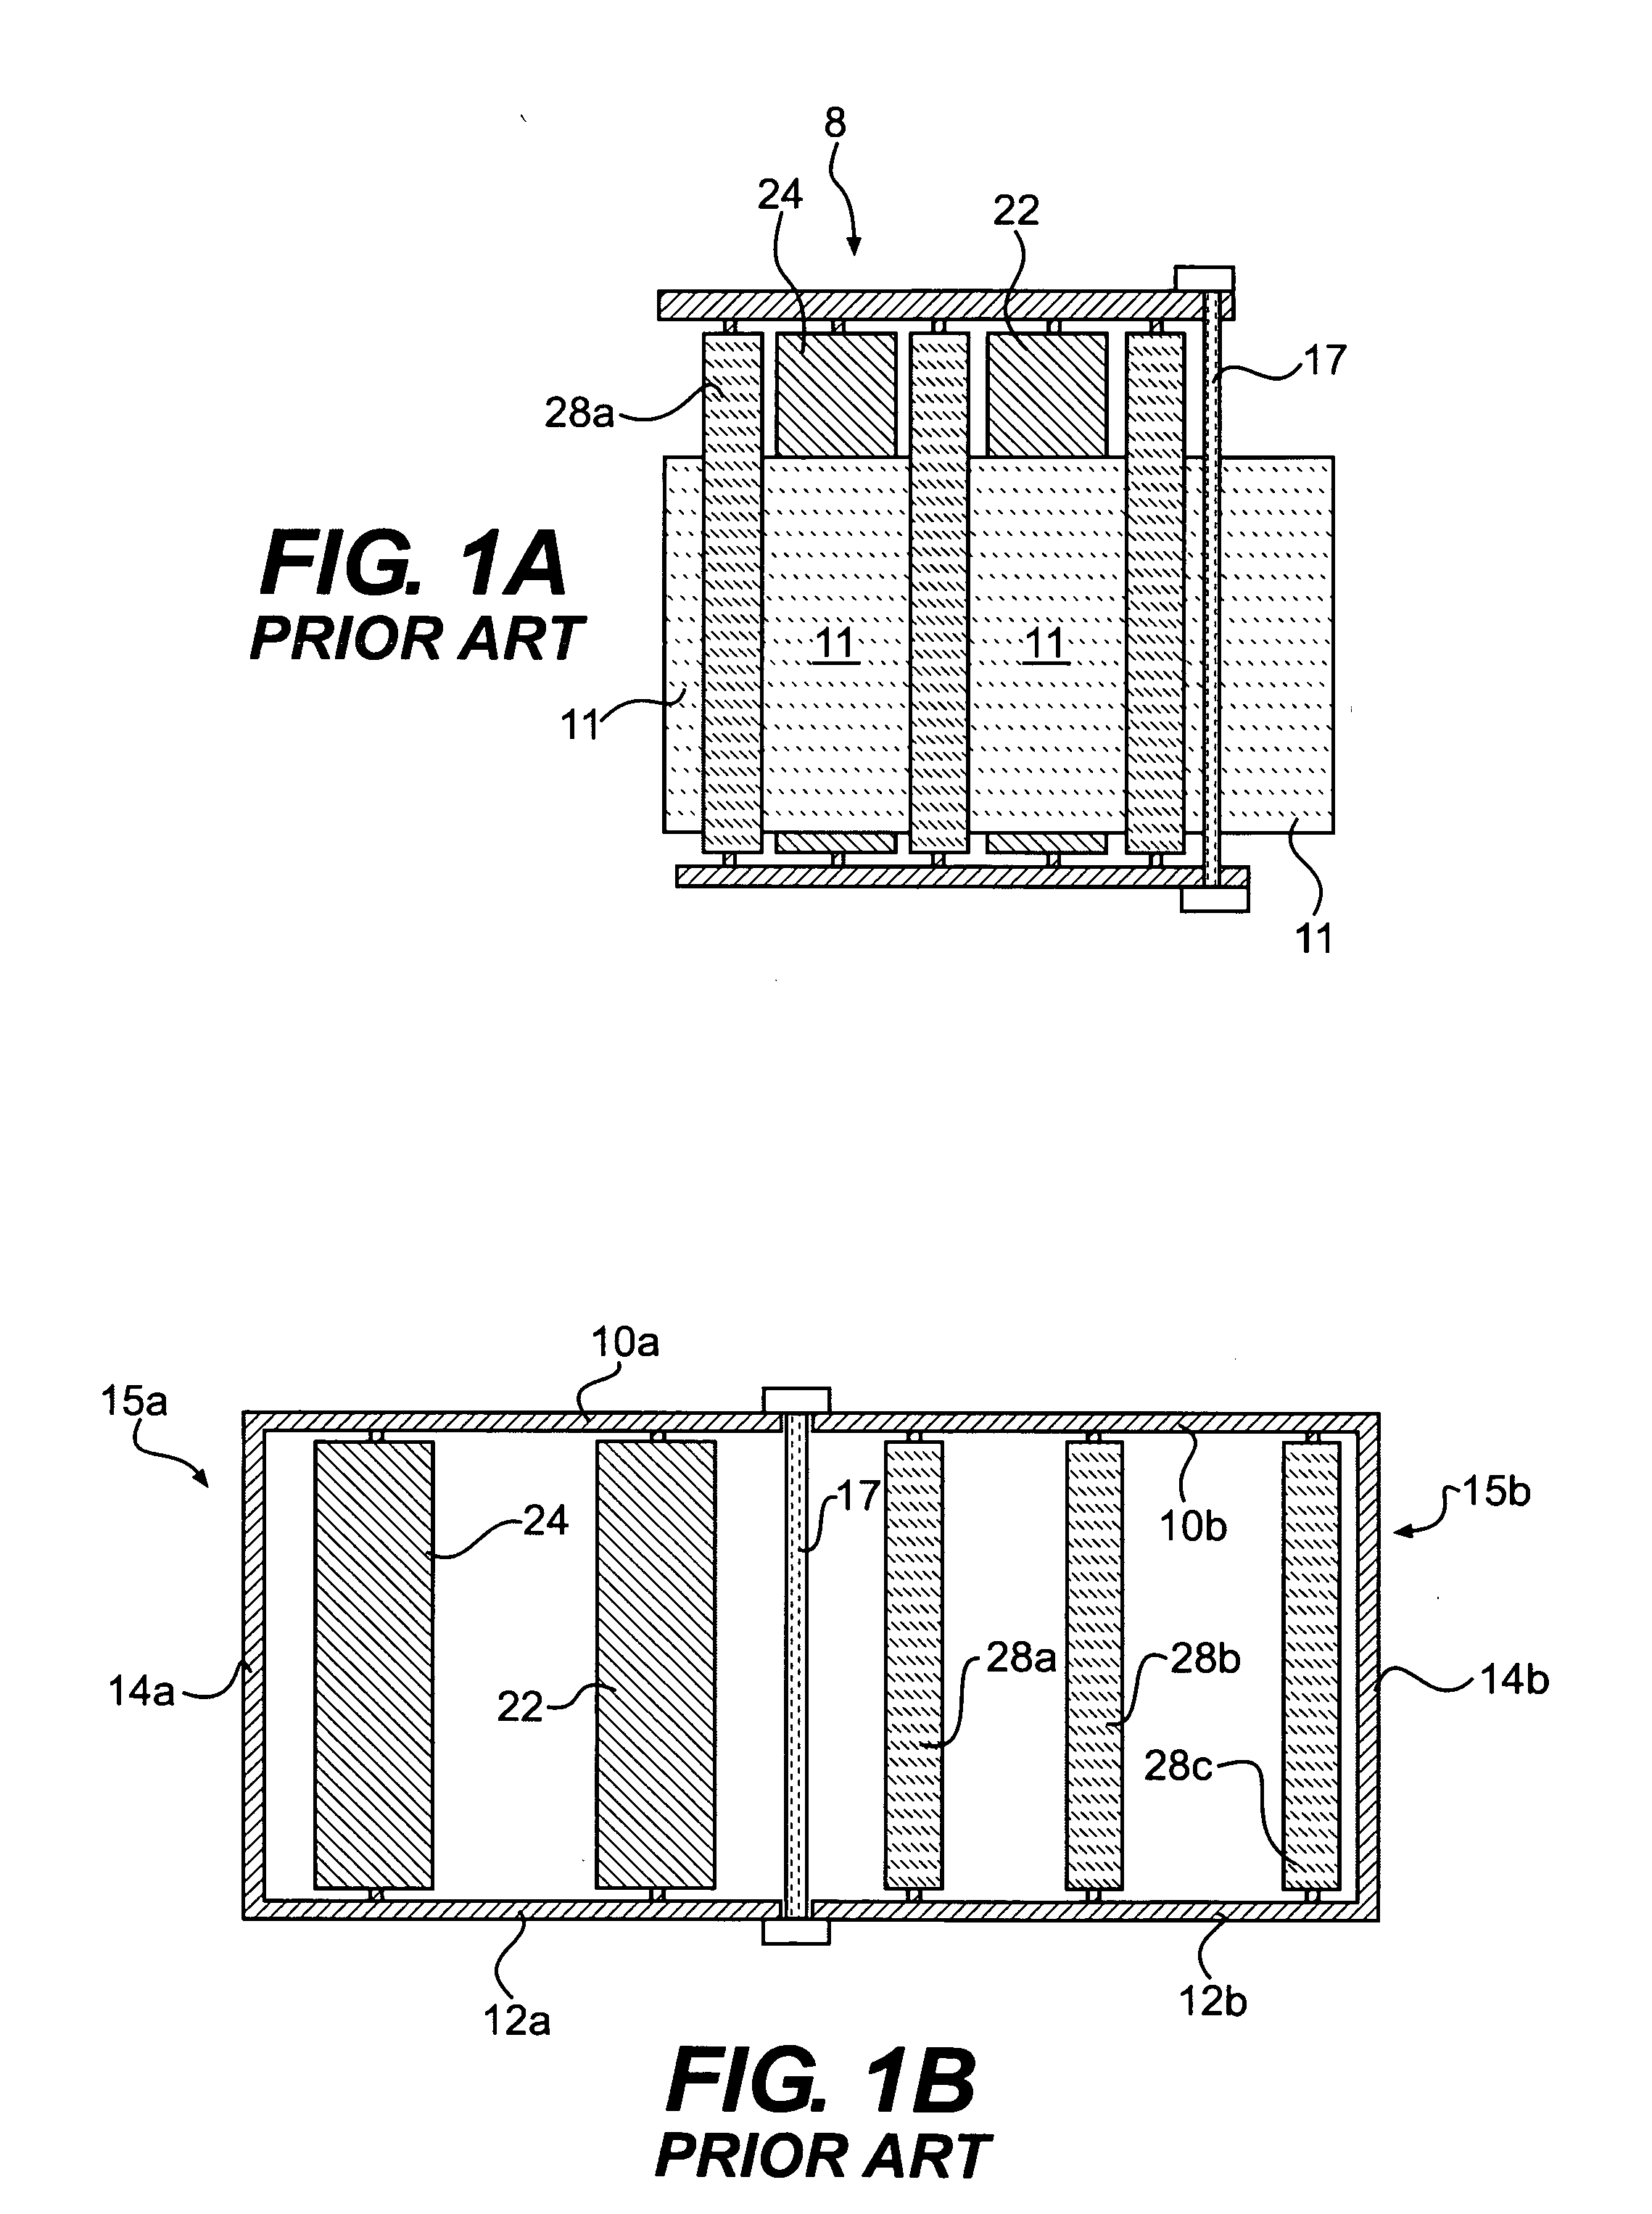 Stretch wrapping apparatus having film dispenser with pre-stretch assembly